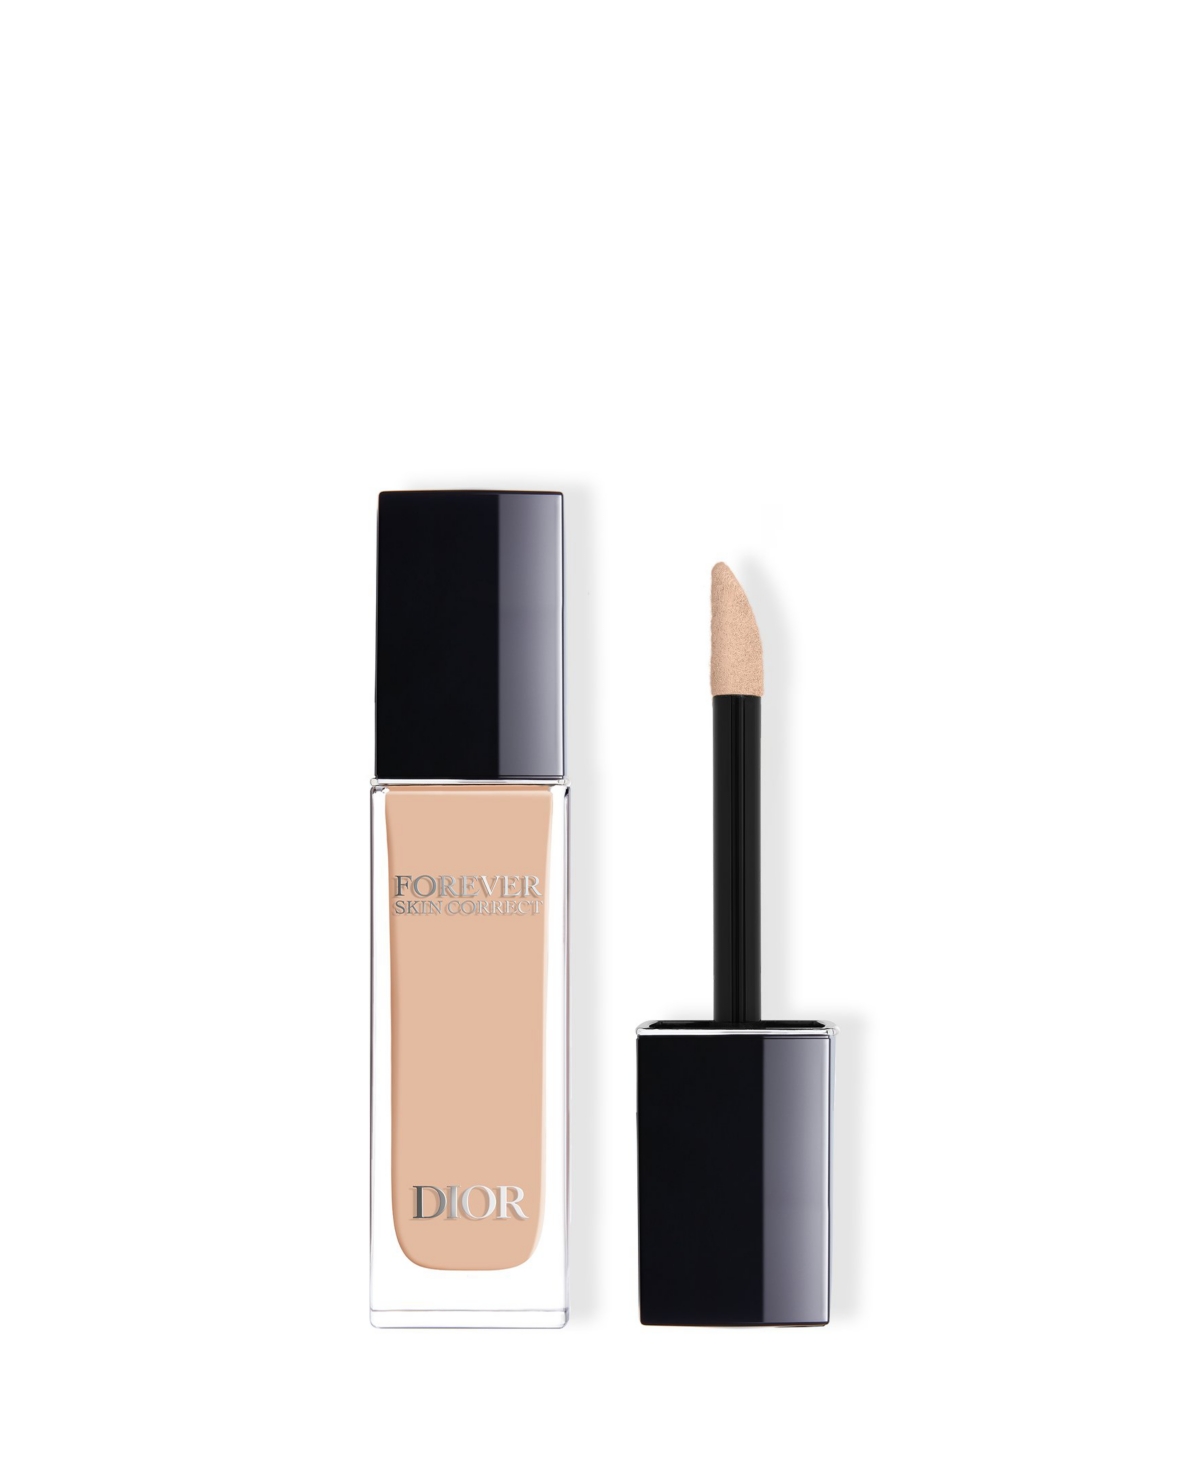 Dior Forever Skin Correct Full-coverage Concealer In Wp Warm Peach (light Skin With Peach Und